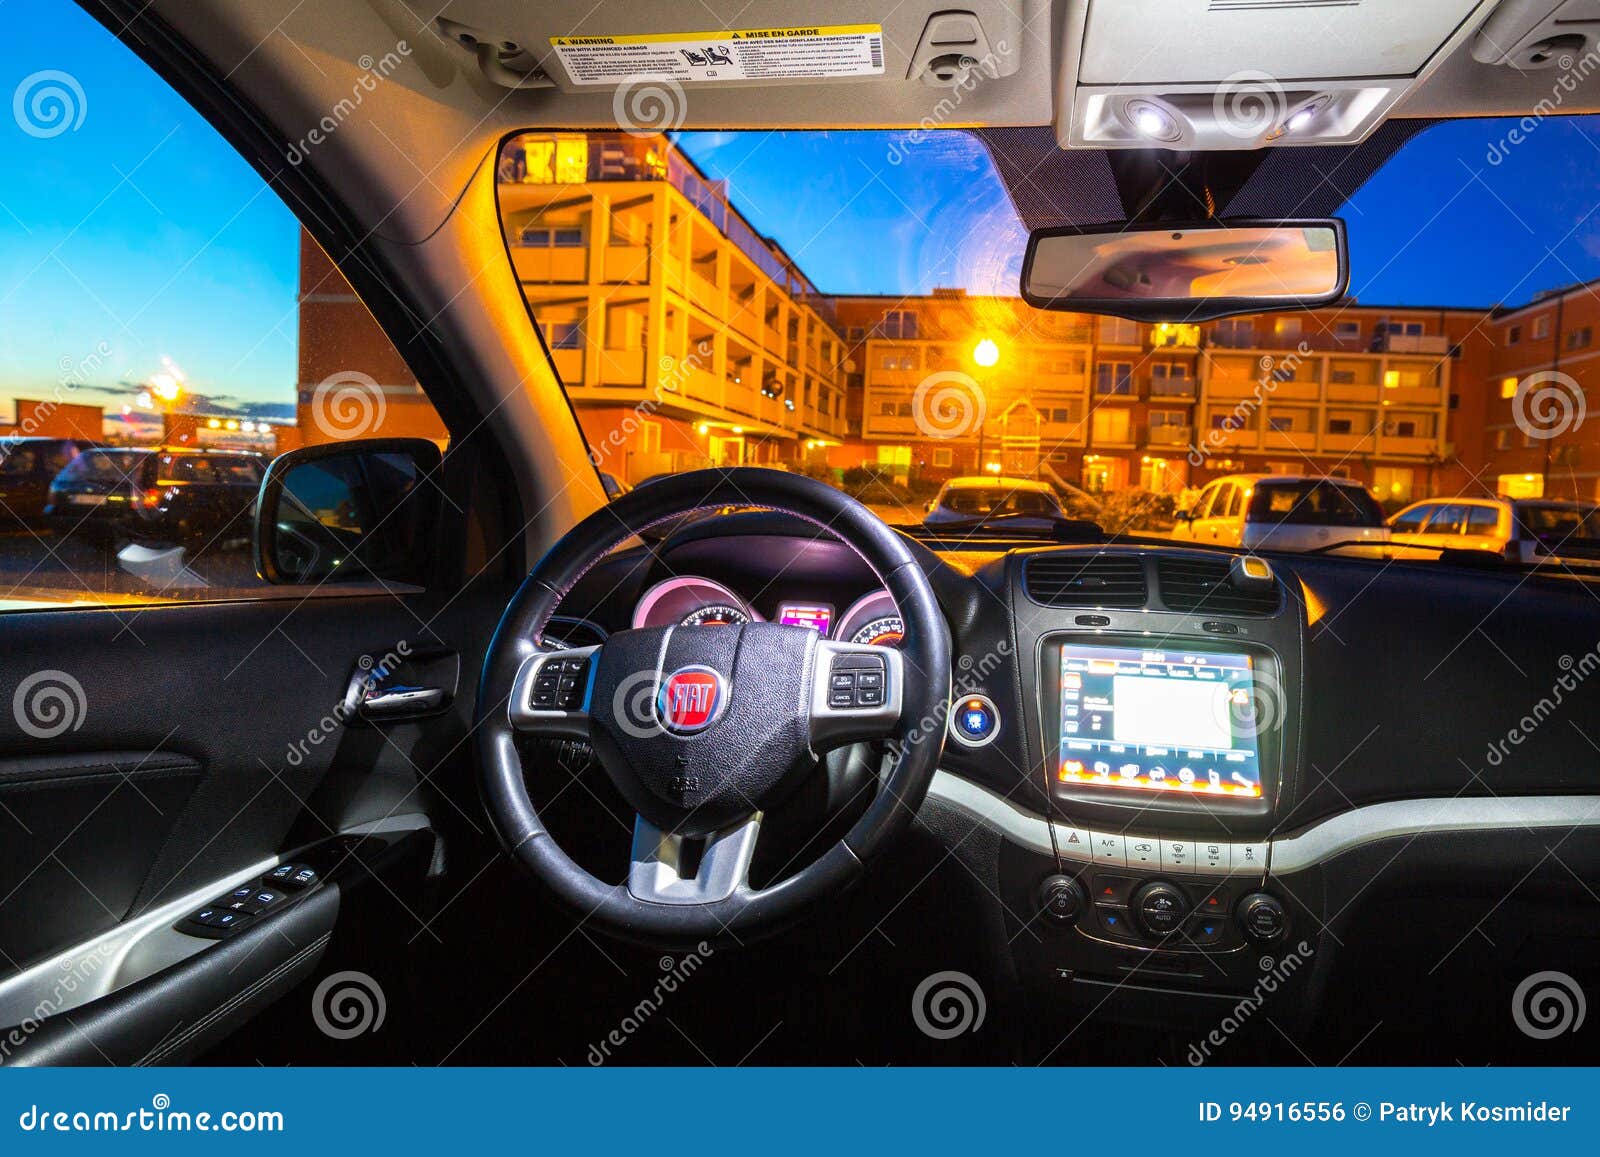 Interior Of Fiat Freemont Suv Car Editorial Photo Image Of